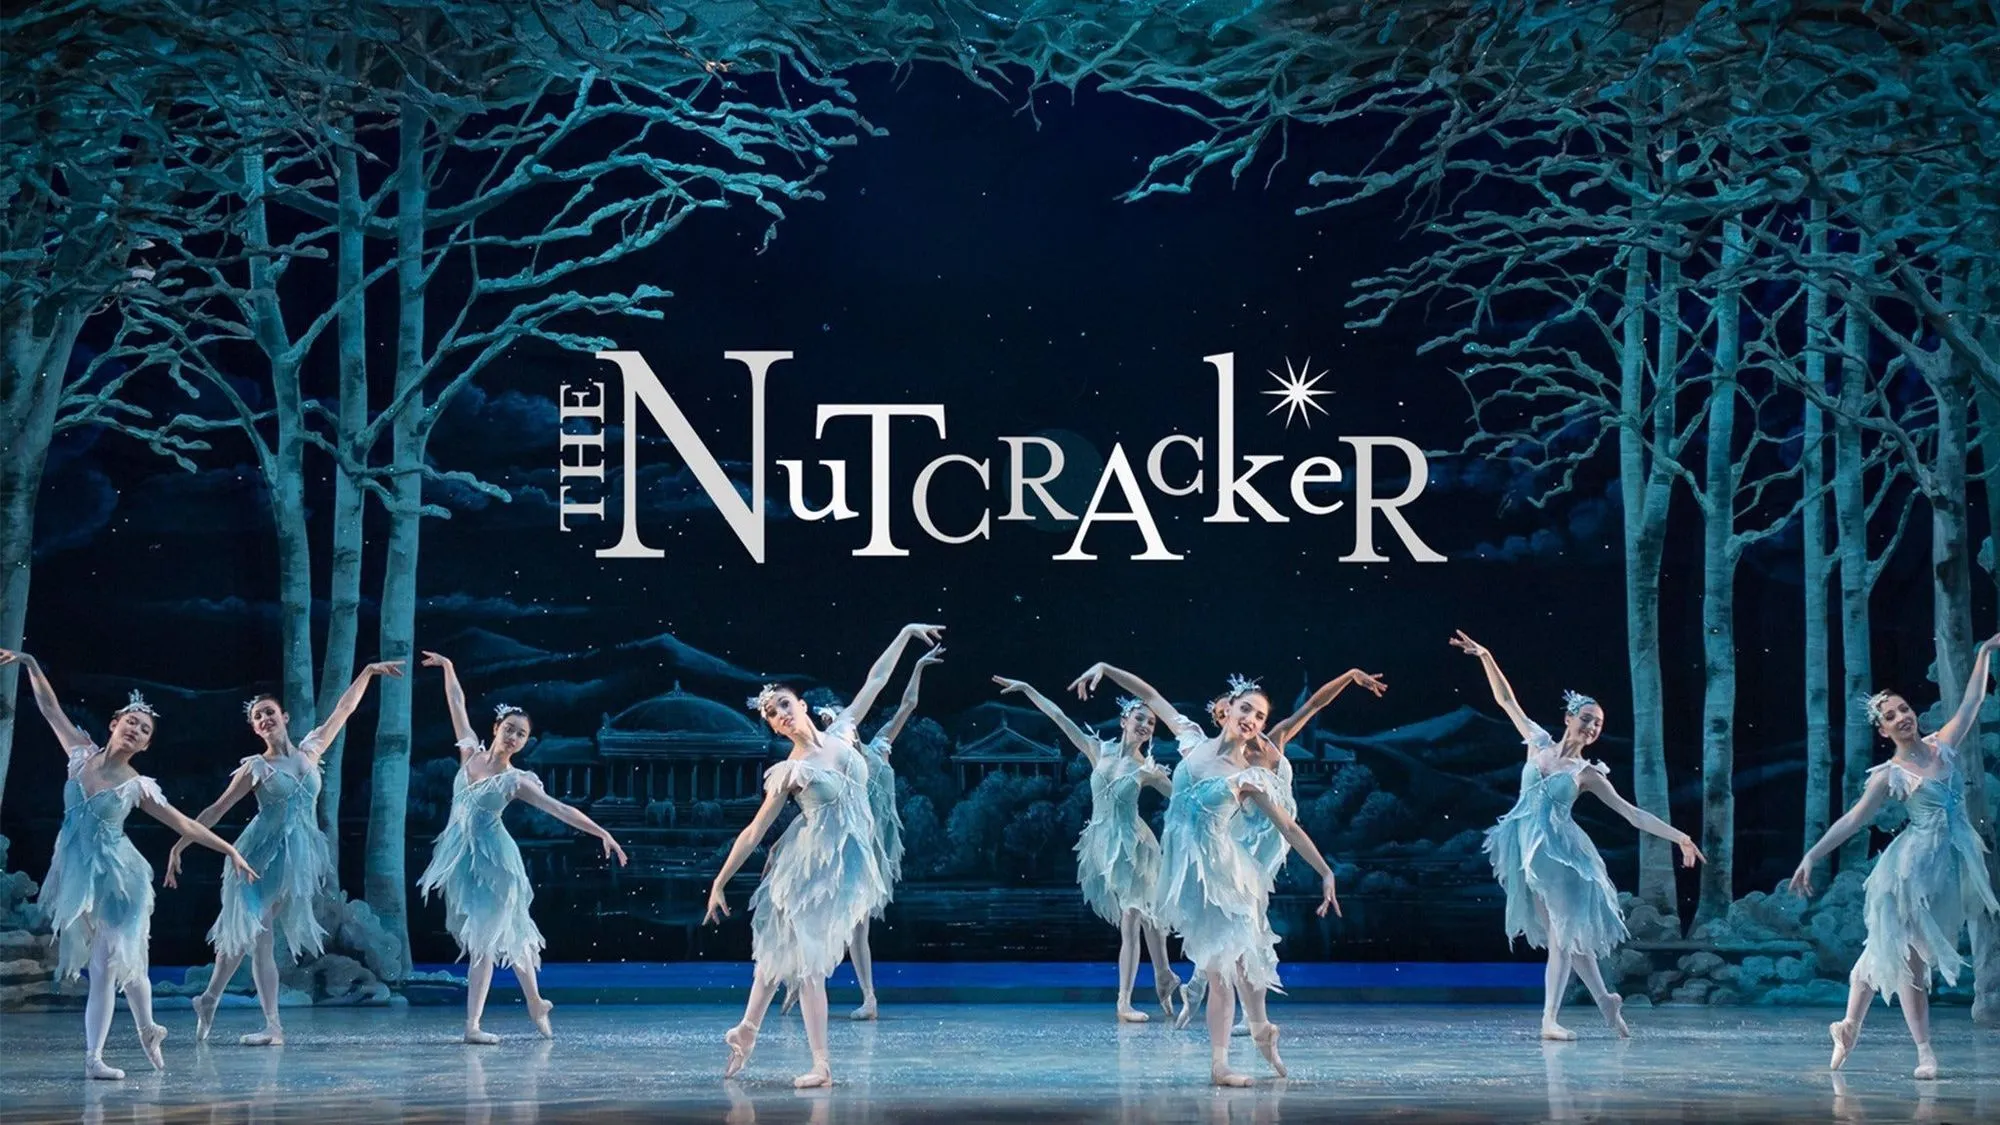 Have an unforgettable Christmas treat this year, get your Nutcracker London Coliseum tickets right away.